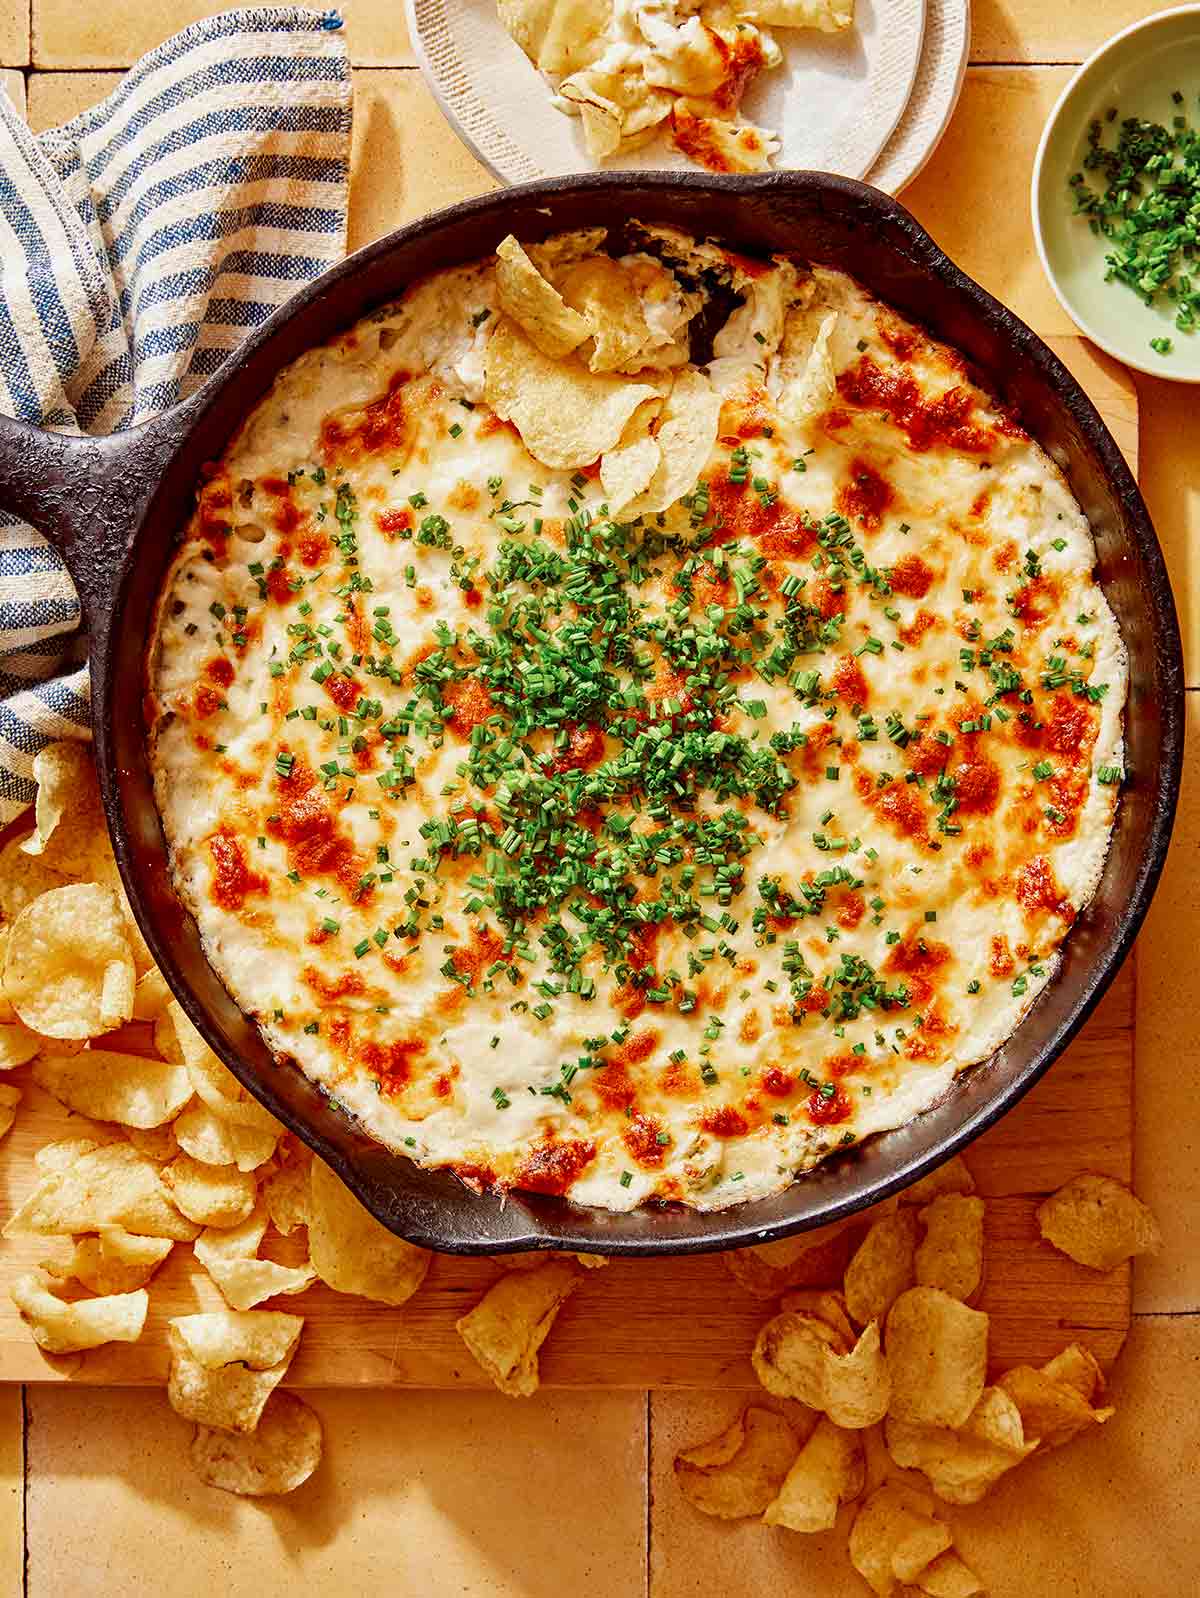 Crab dip in a skillet on a table with chips on the side.